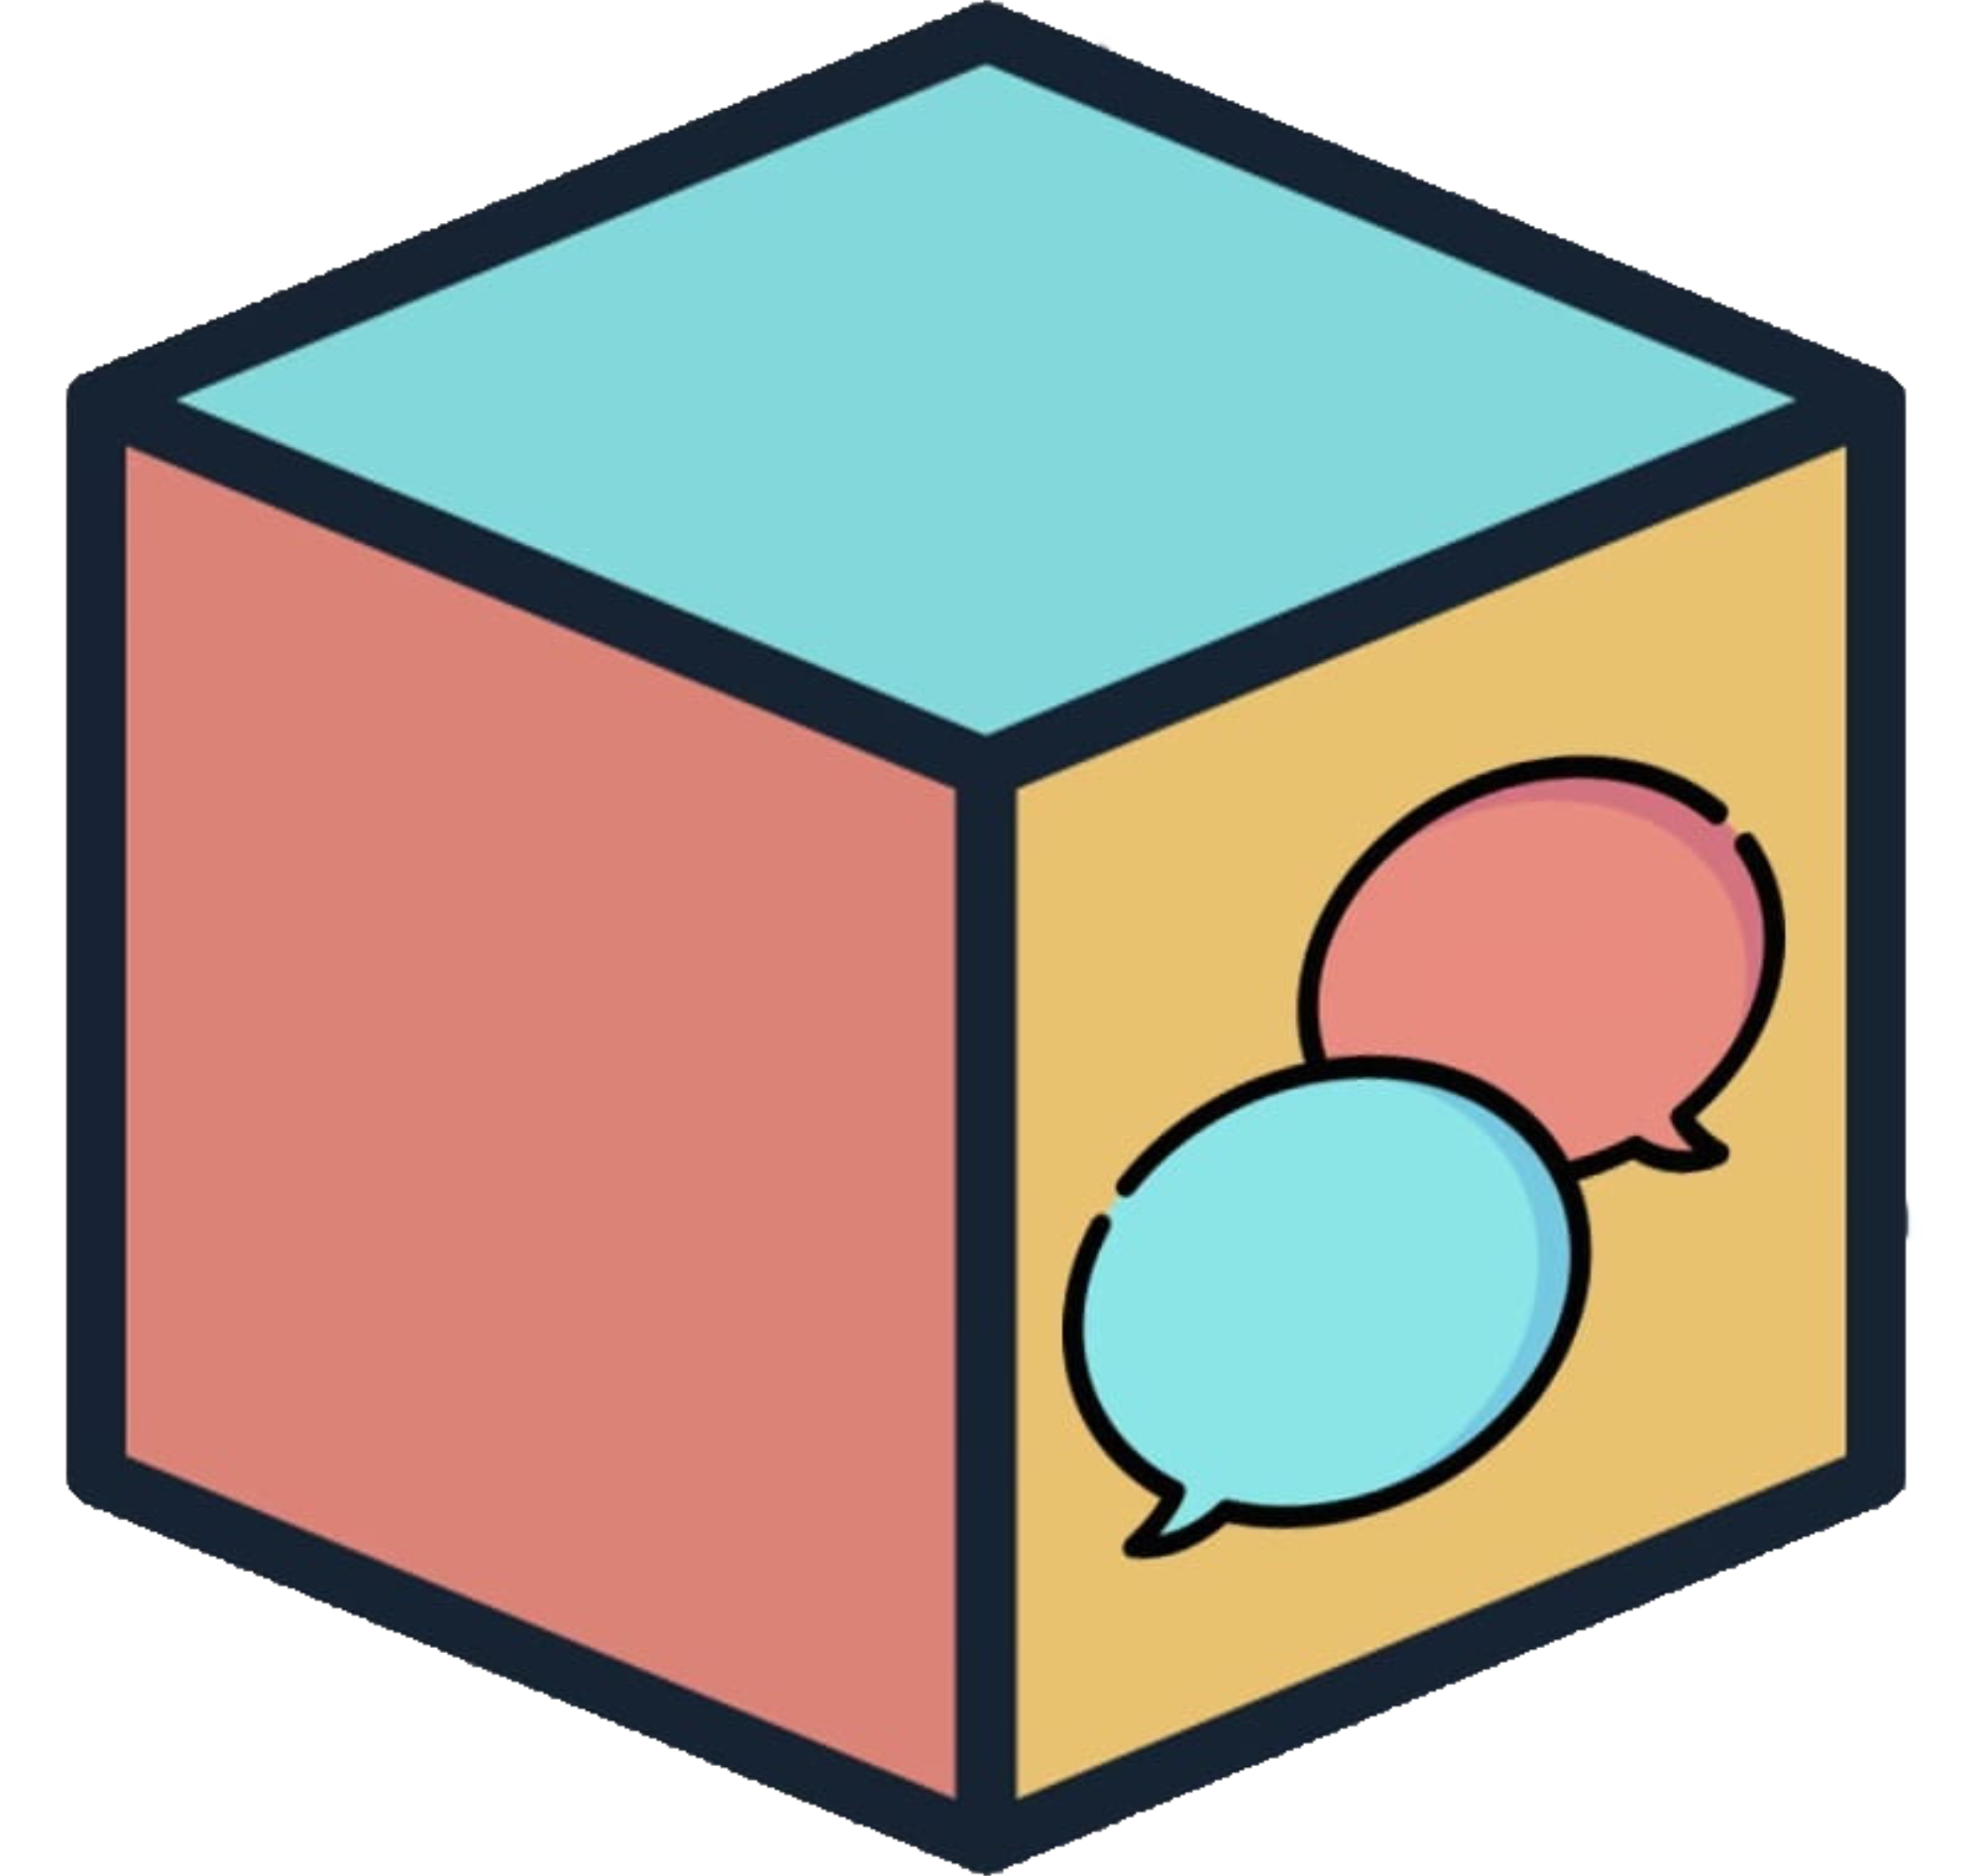 Free Resources & Strategies for Higher Ed Entrepreneurial Ecosystem Building. The C•CUBE Toolkit from UWO & Venn Collaborative sponsored by the Kauffman Foundation